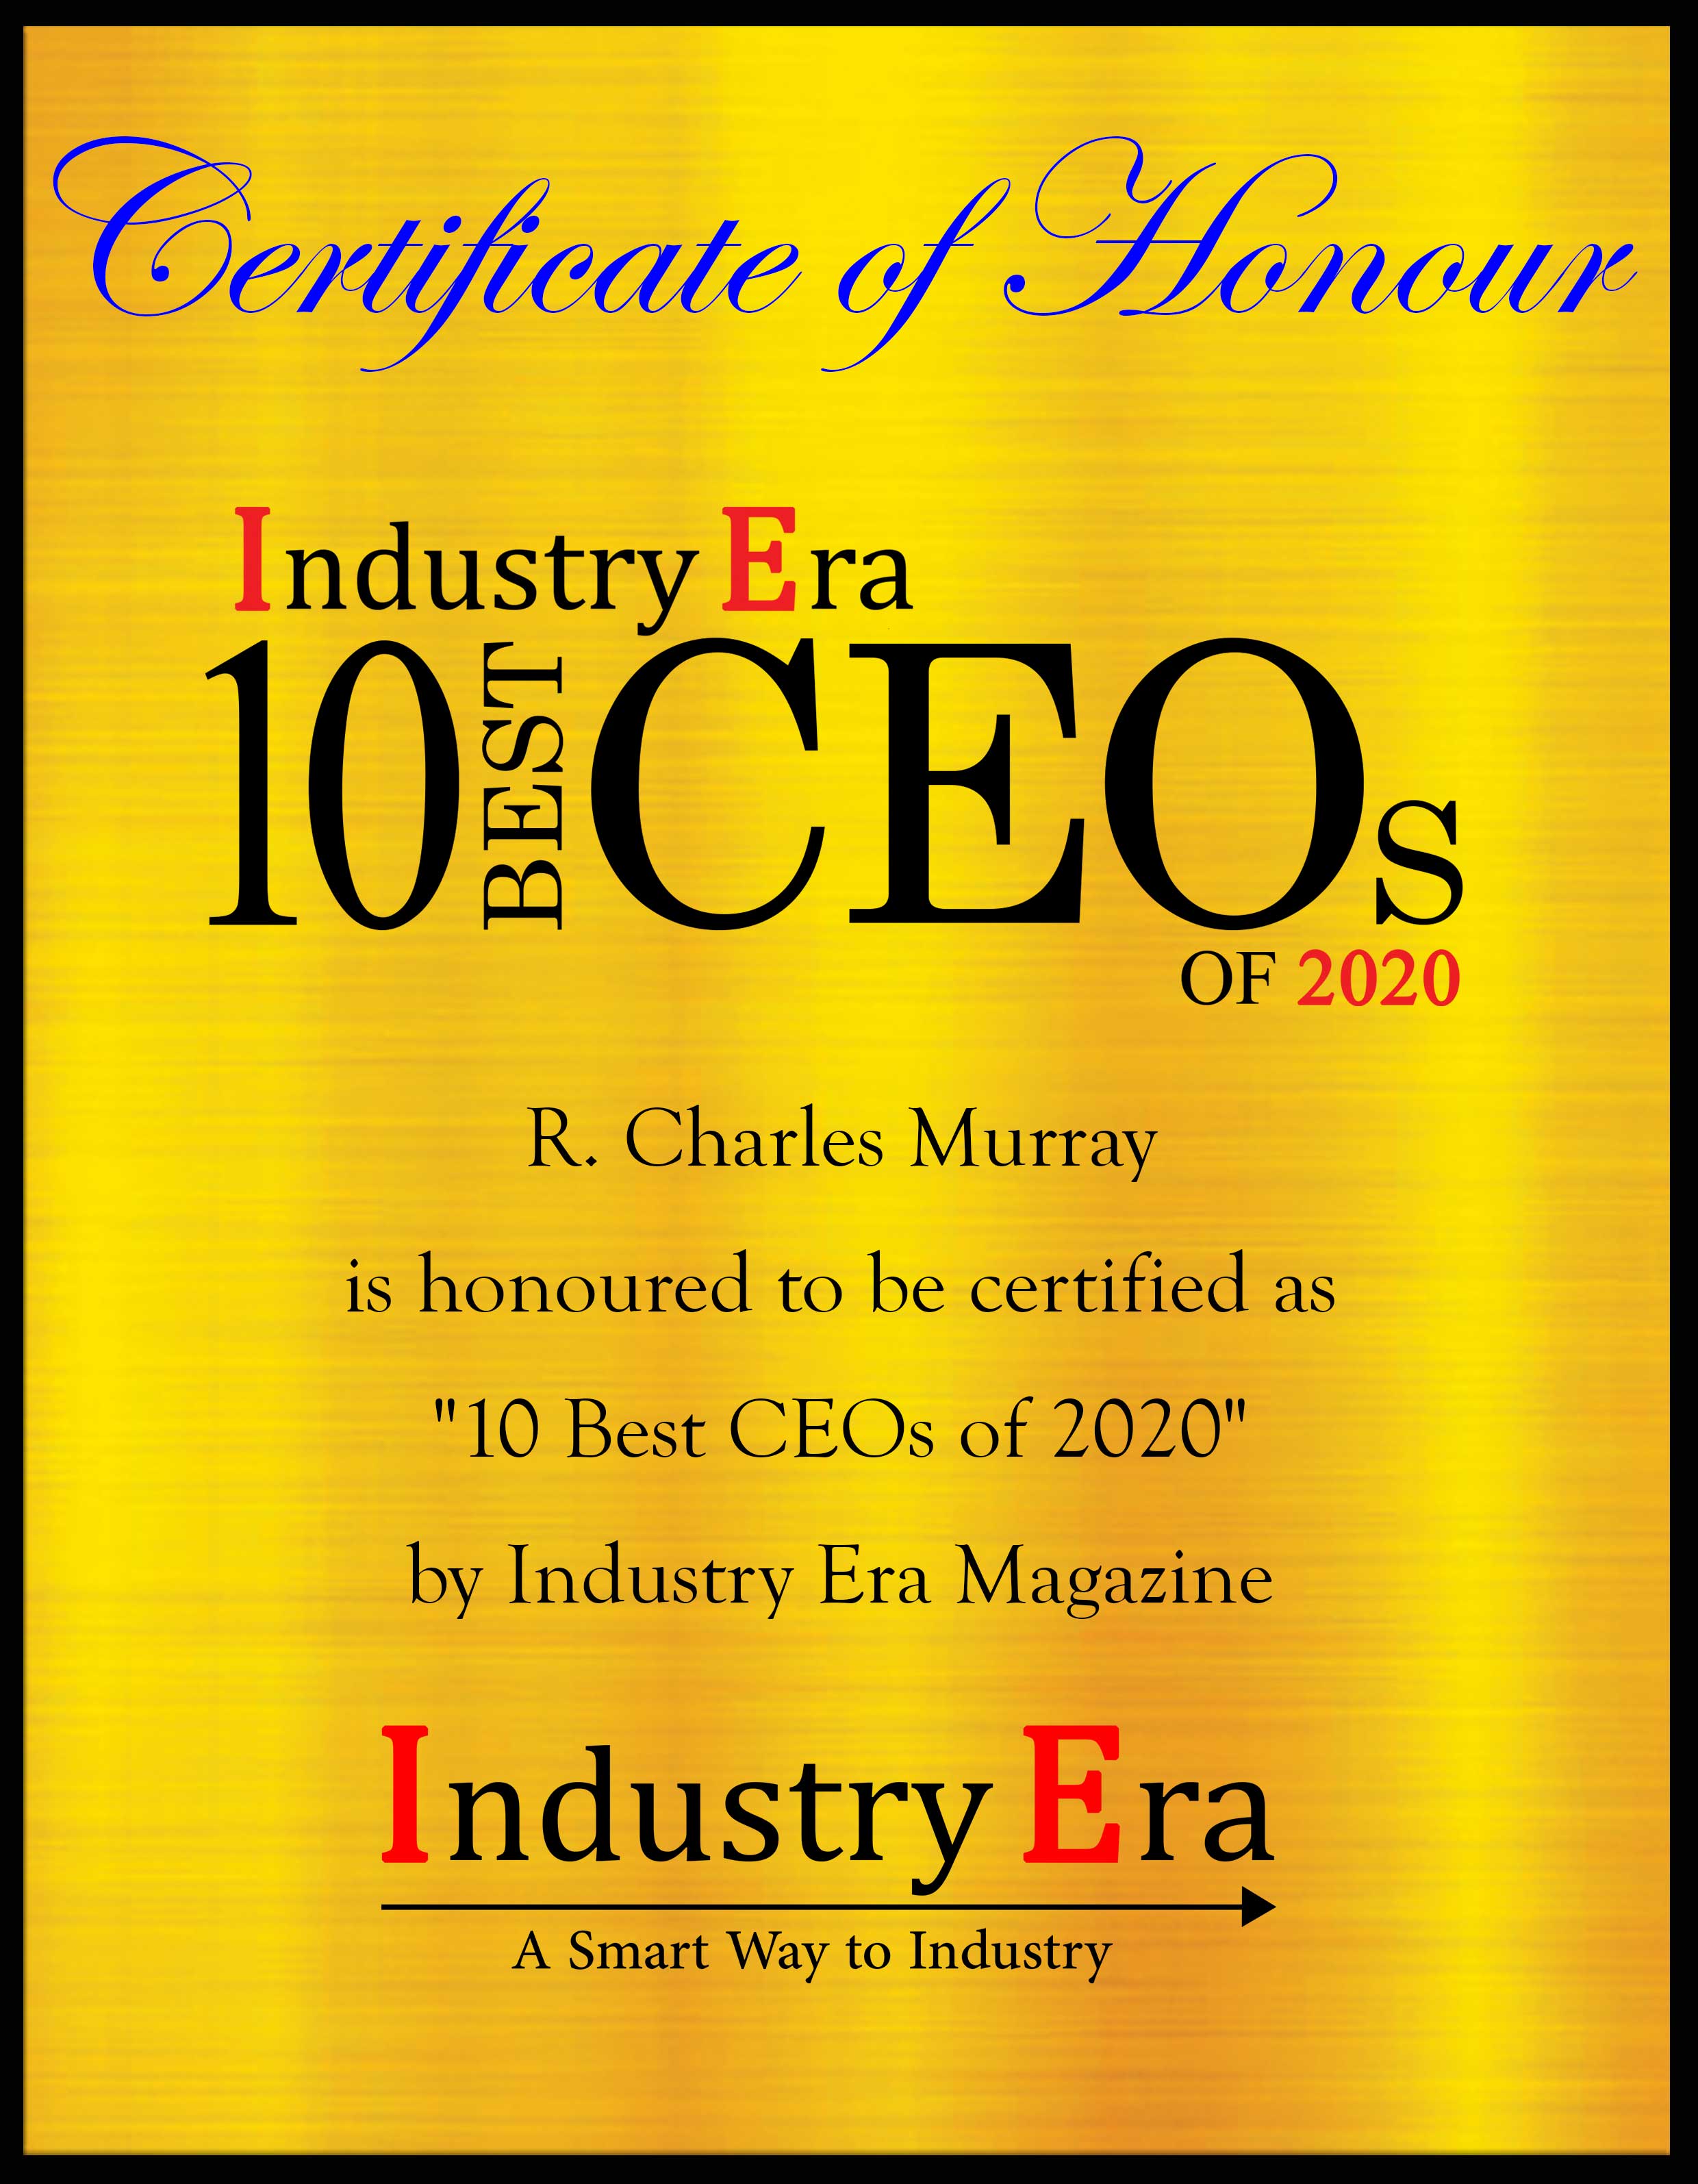 R. Charles Murray, CEO of PPi Technologies GROUP Certificate